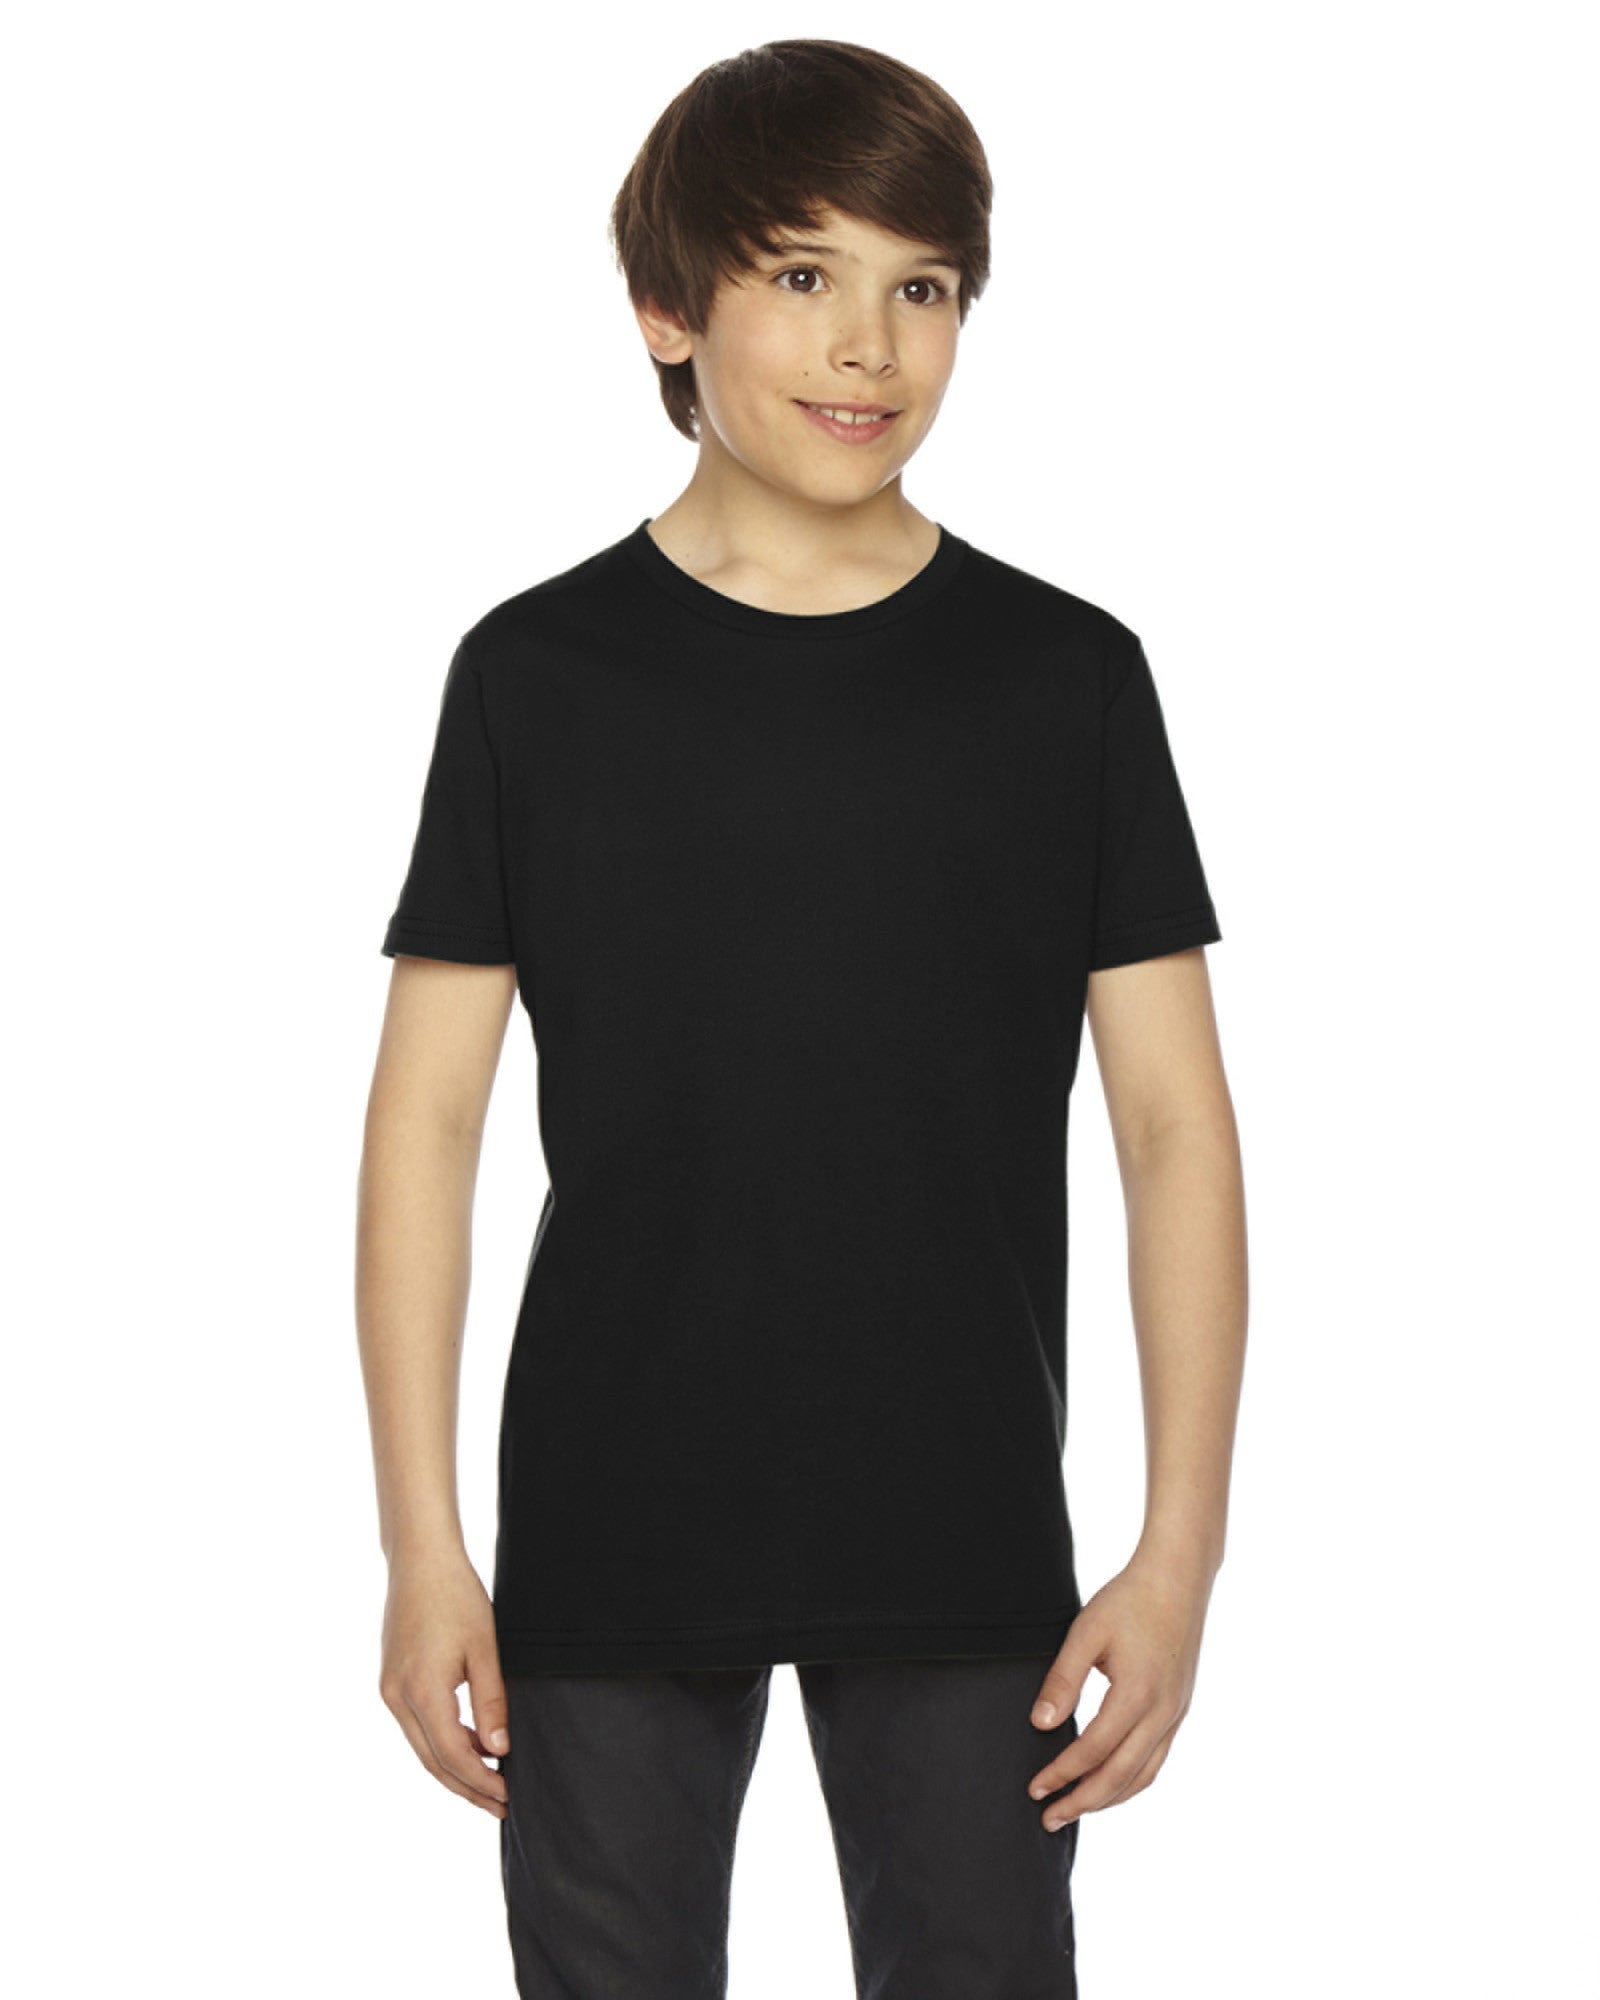 American Apparel Youth Jersey T-shirt